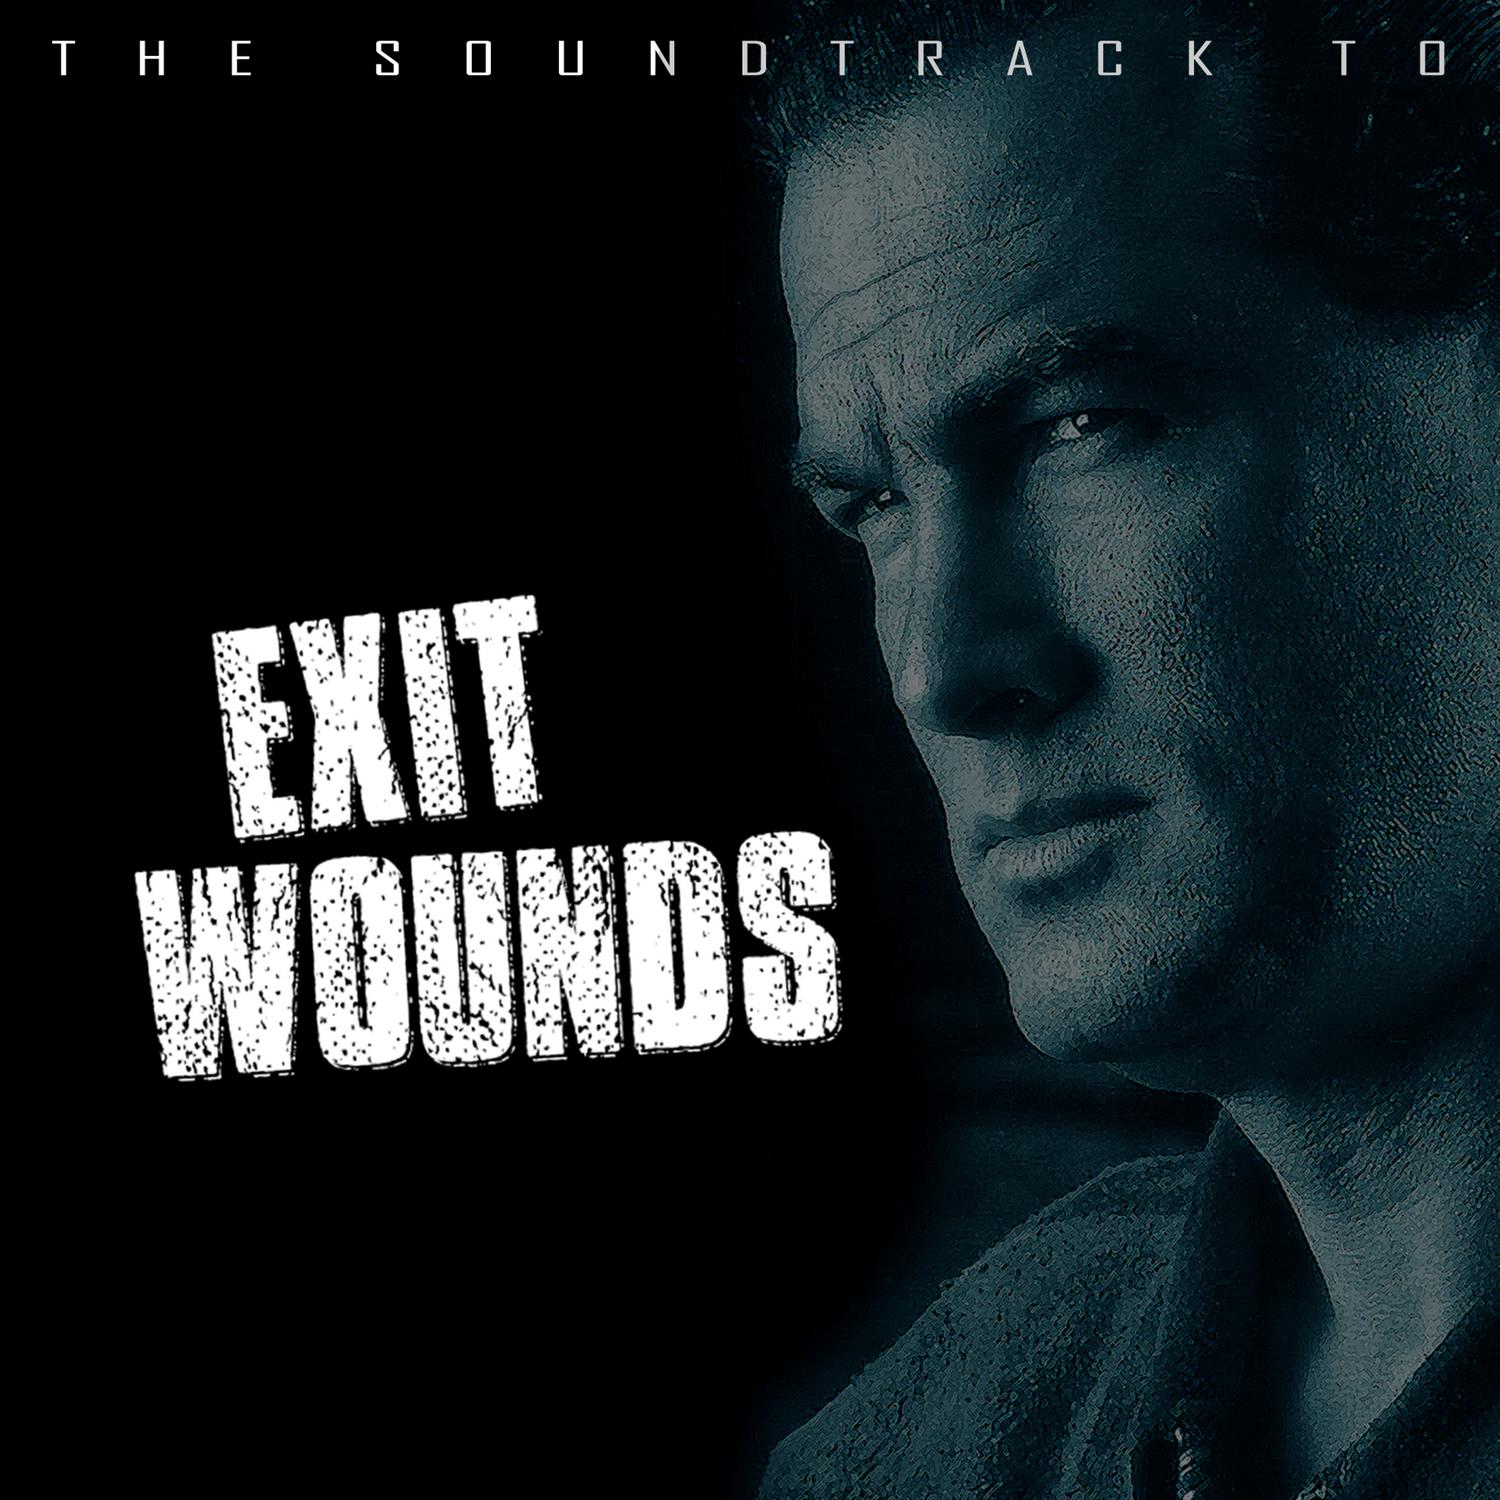 The Soundtrack to Exit Wounds